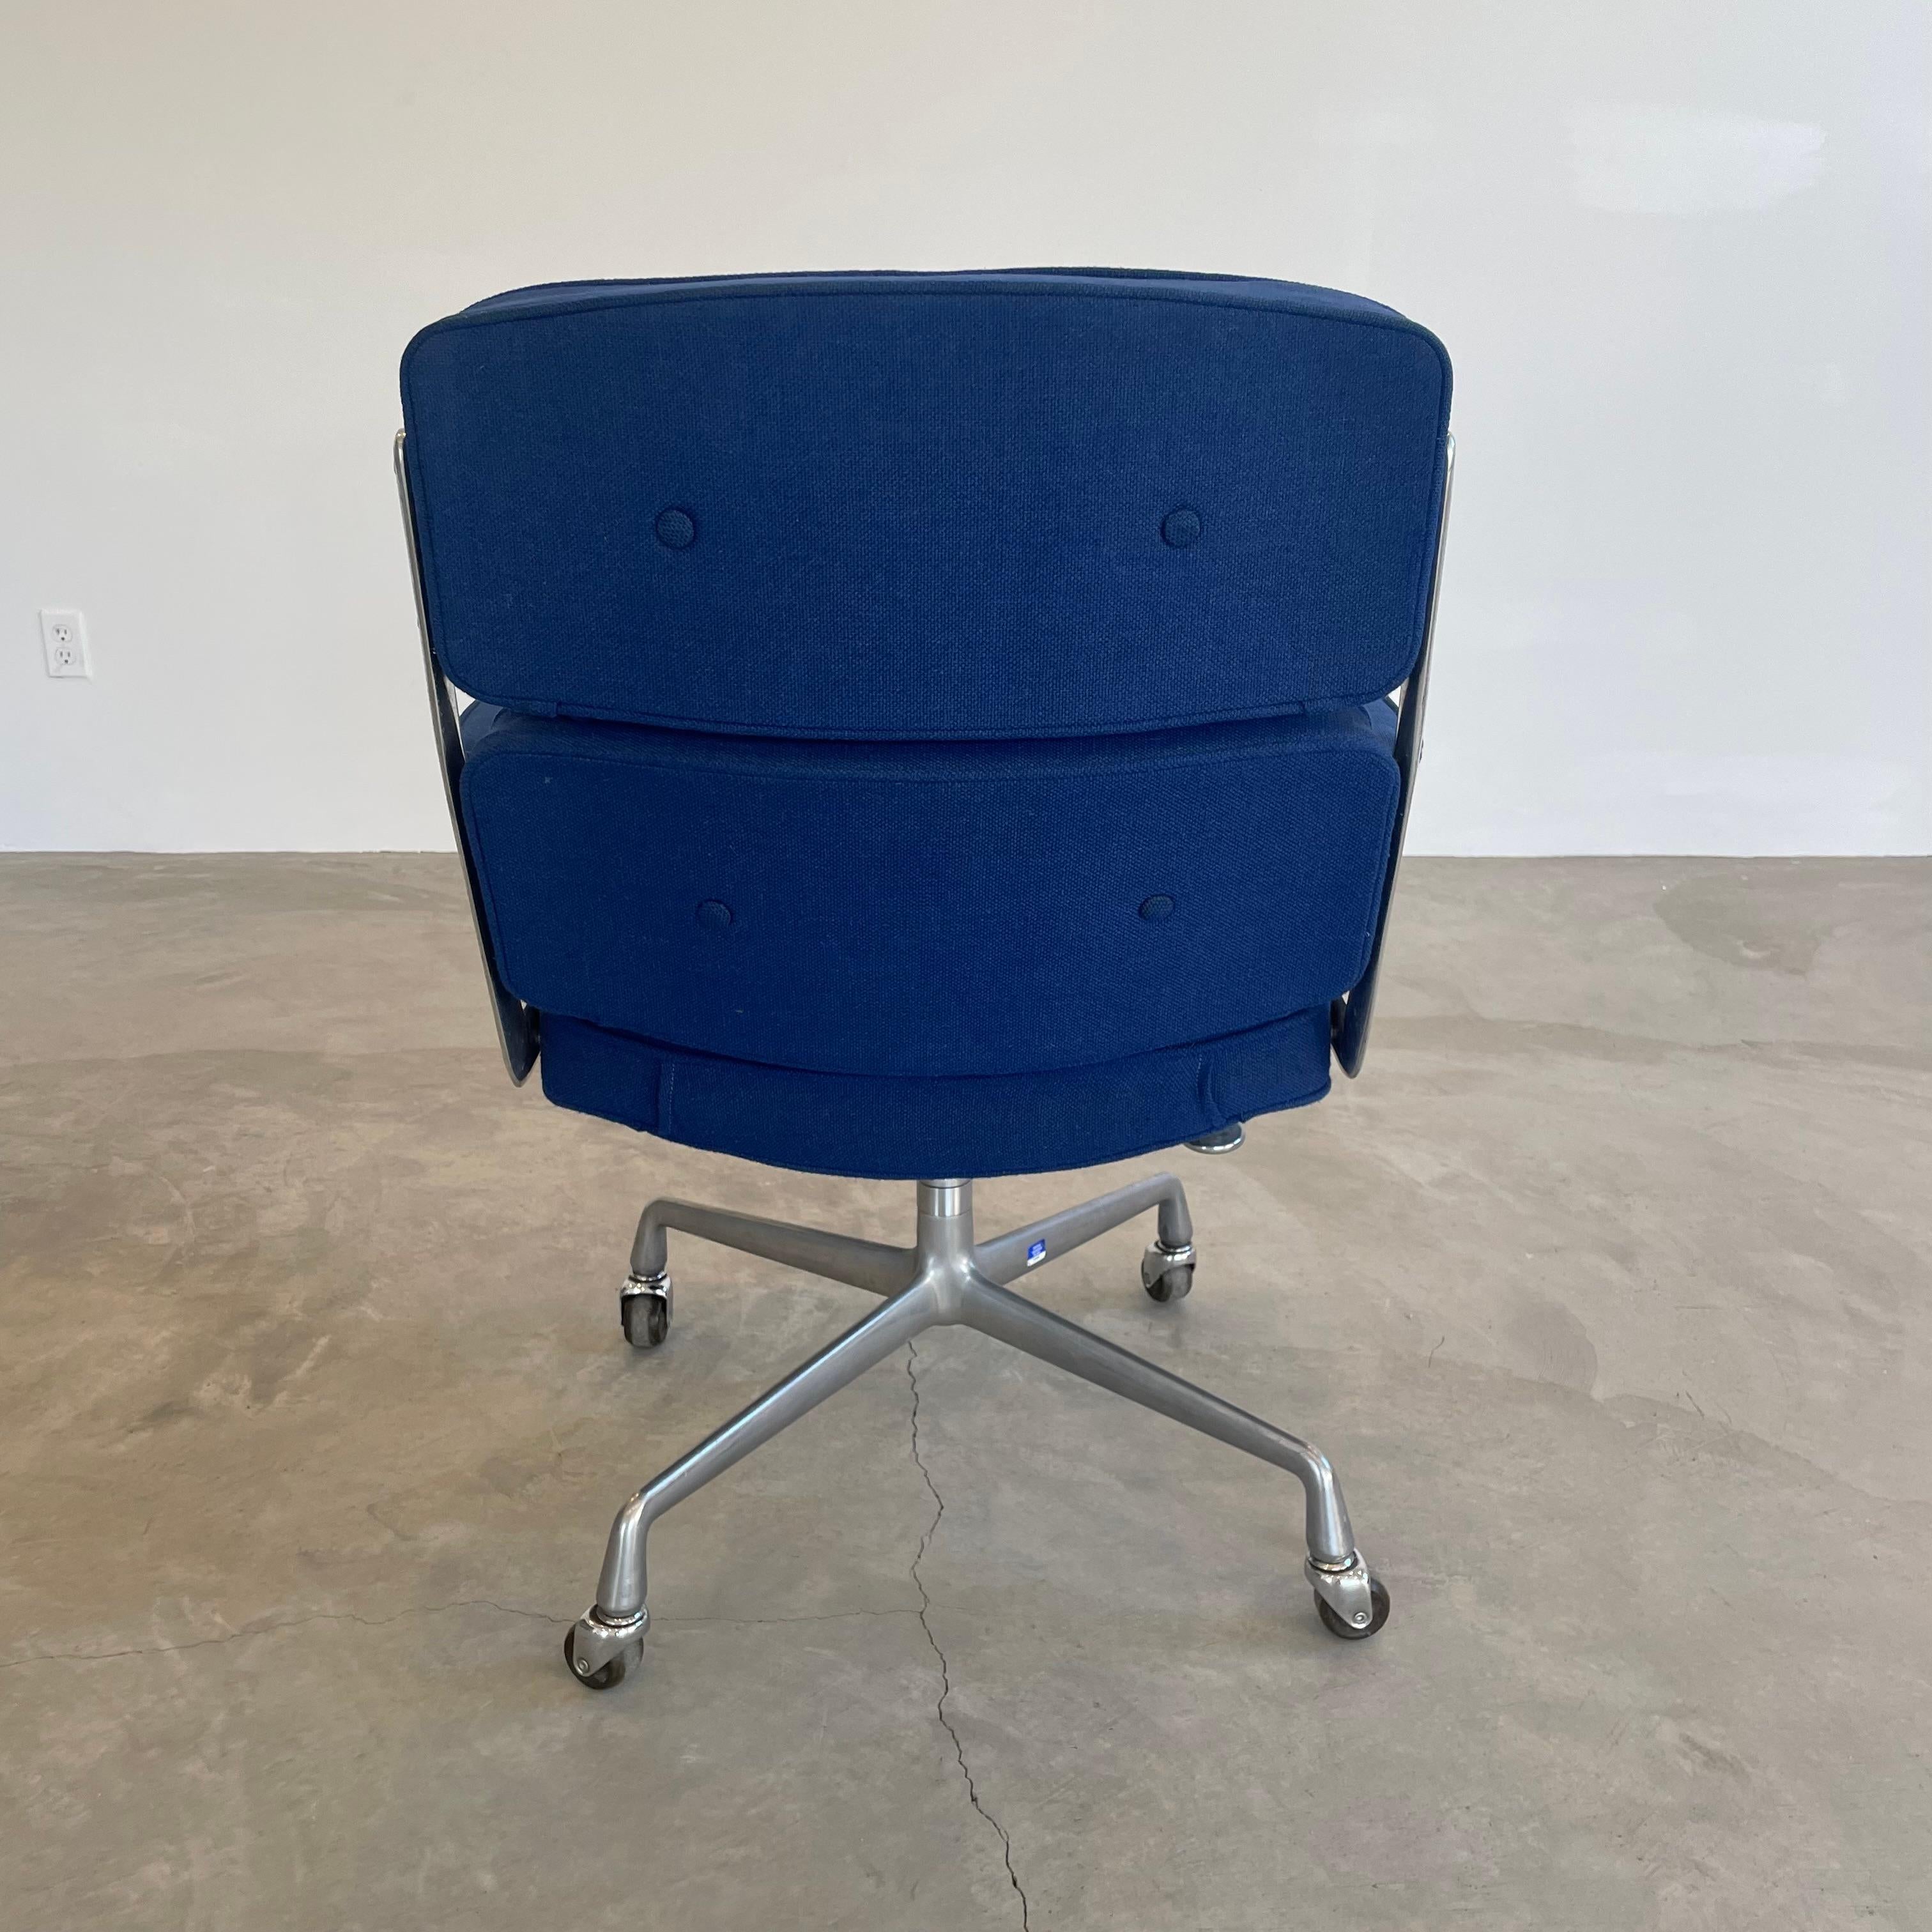 Late 20th Century Eames Time Life Chair in Navy Blue Burlap for Herman Miller, 1978 USA For Sale